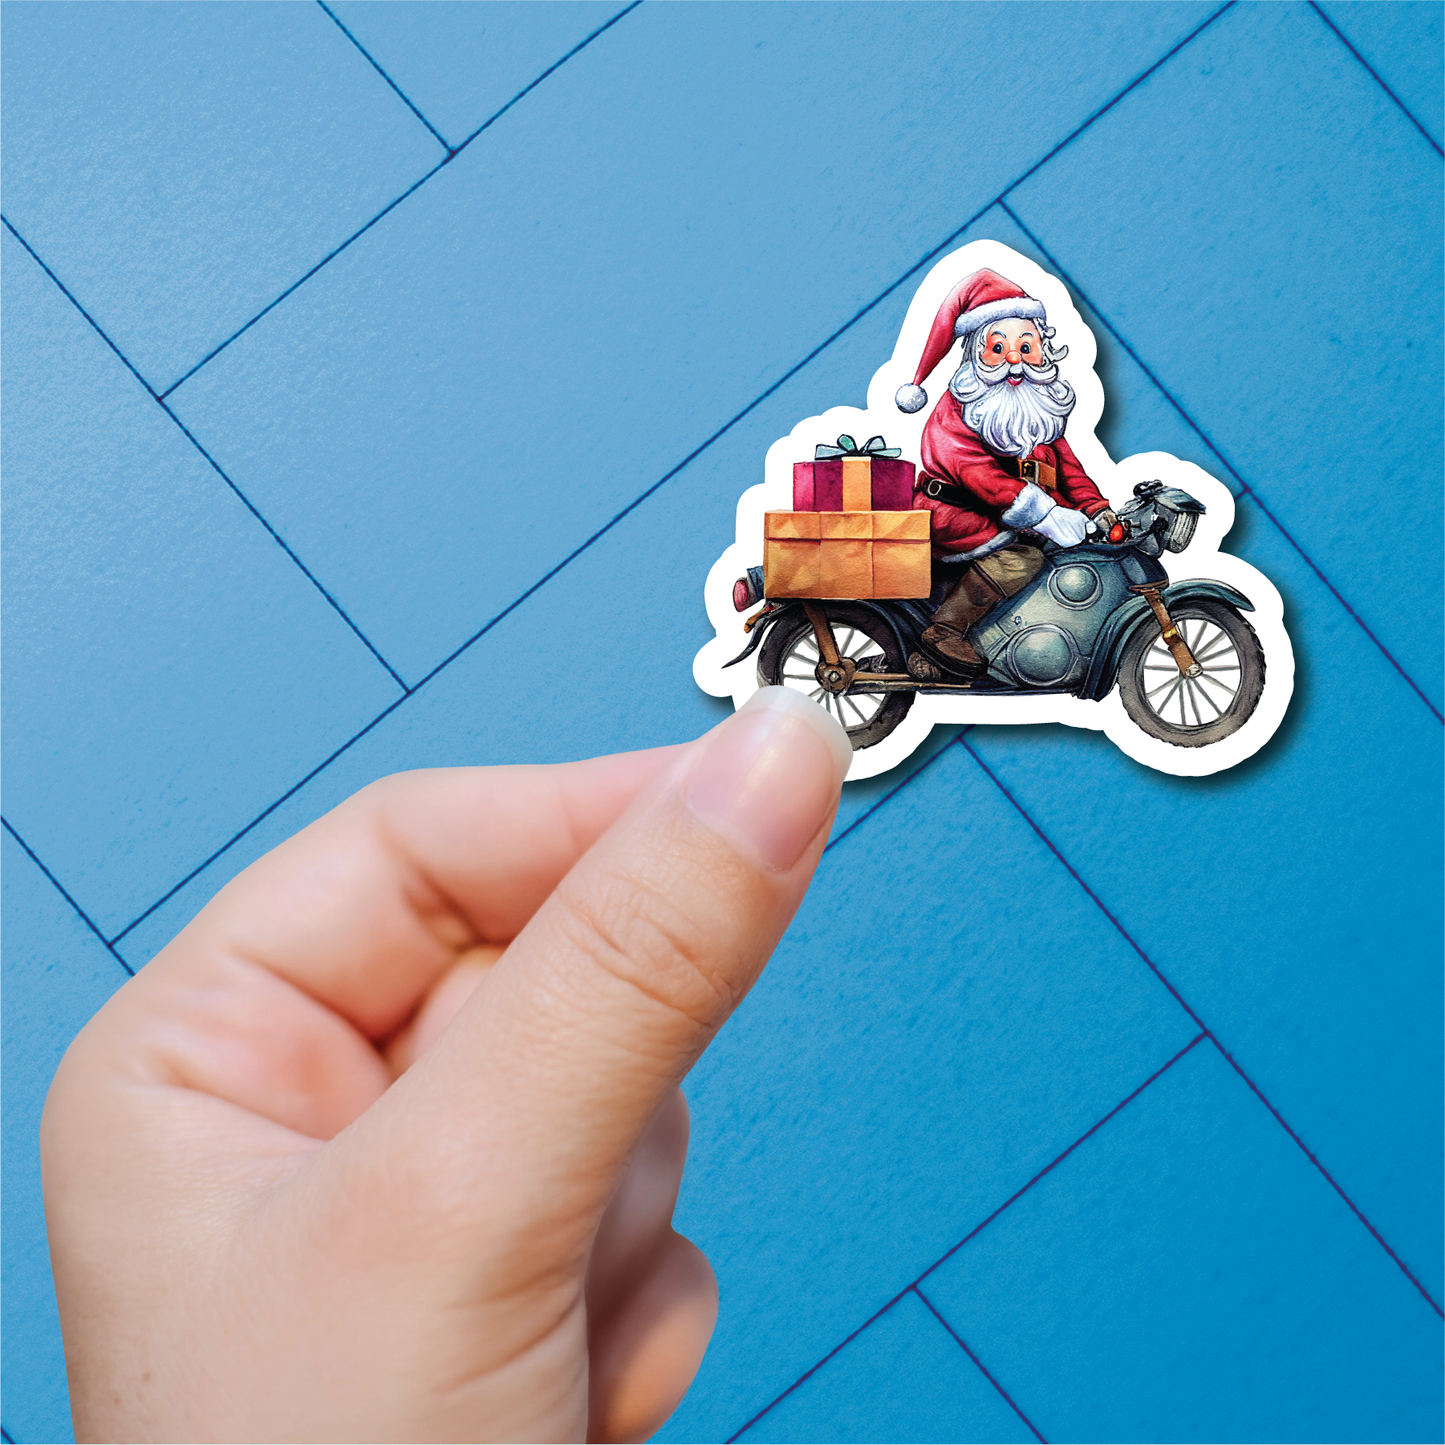 Nontraditional Santa Claus - Full Color Vinyl Stickers (SHIPS IN 3-7 BUS DAYS)